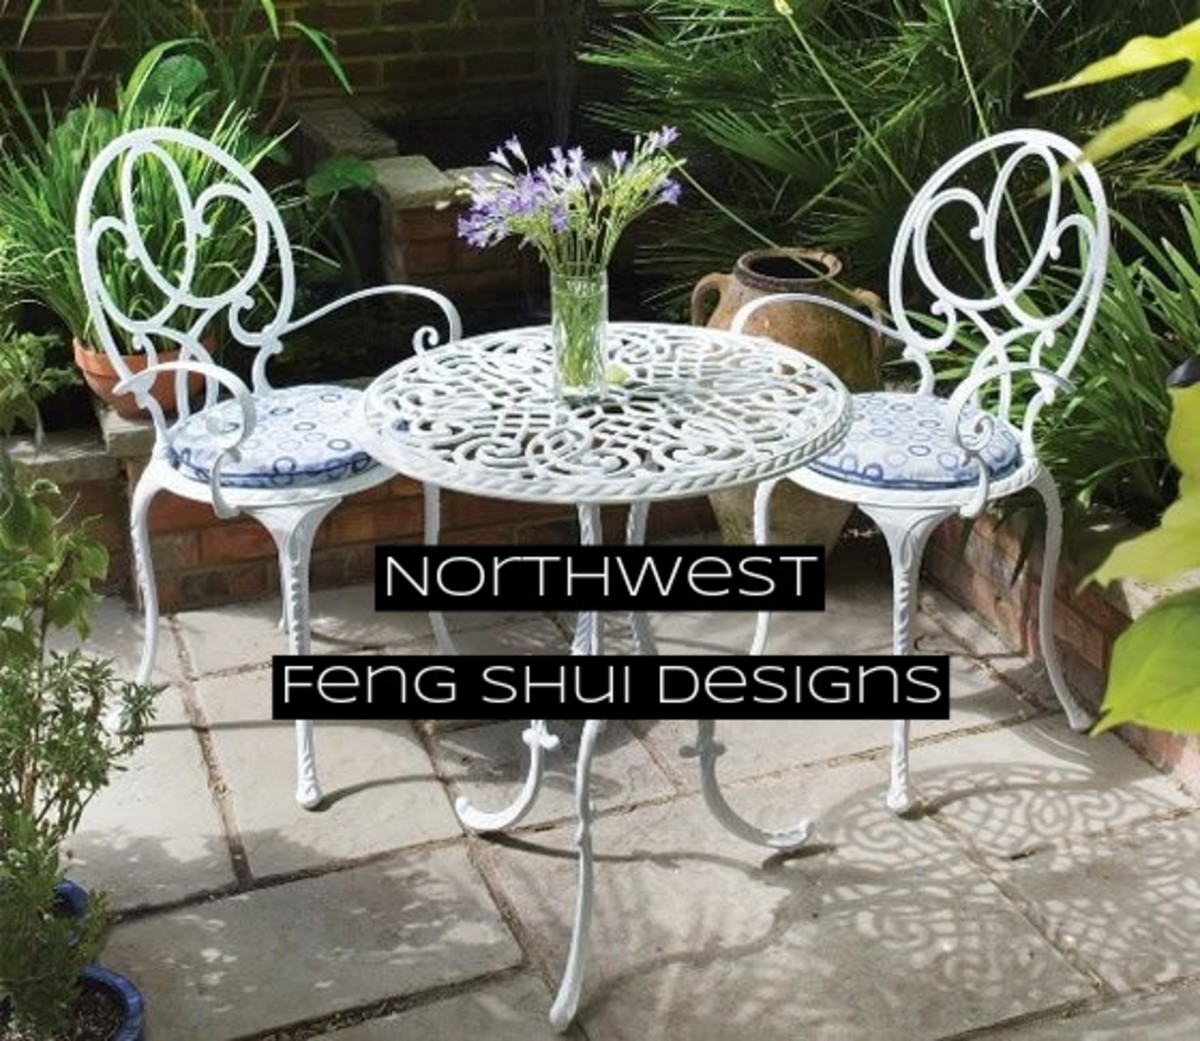 The Northwest is the part of your garden where you embrace metal, spirituality, and the cosmos. Add metal art in white and silver. This space is meant for meeting new people: add chairs.